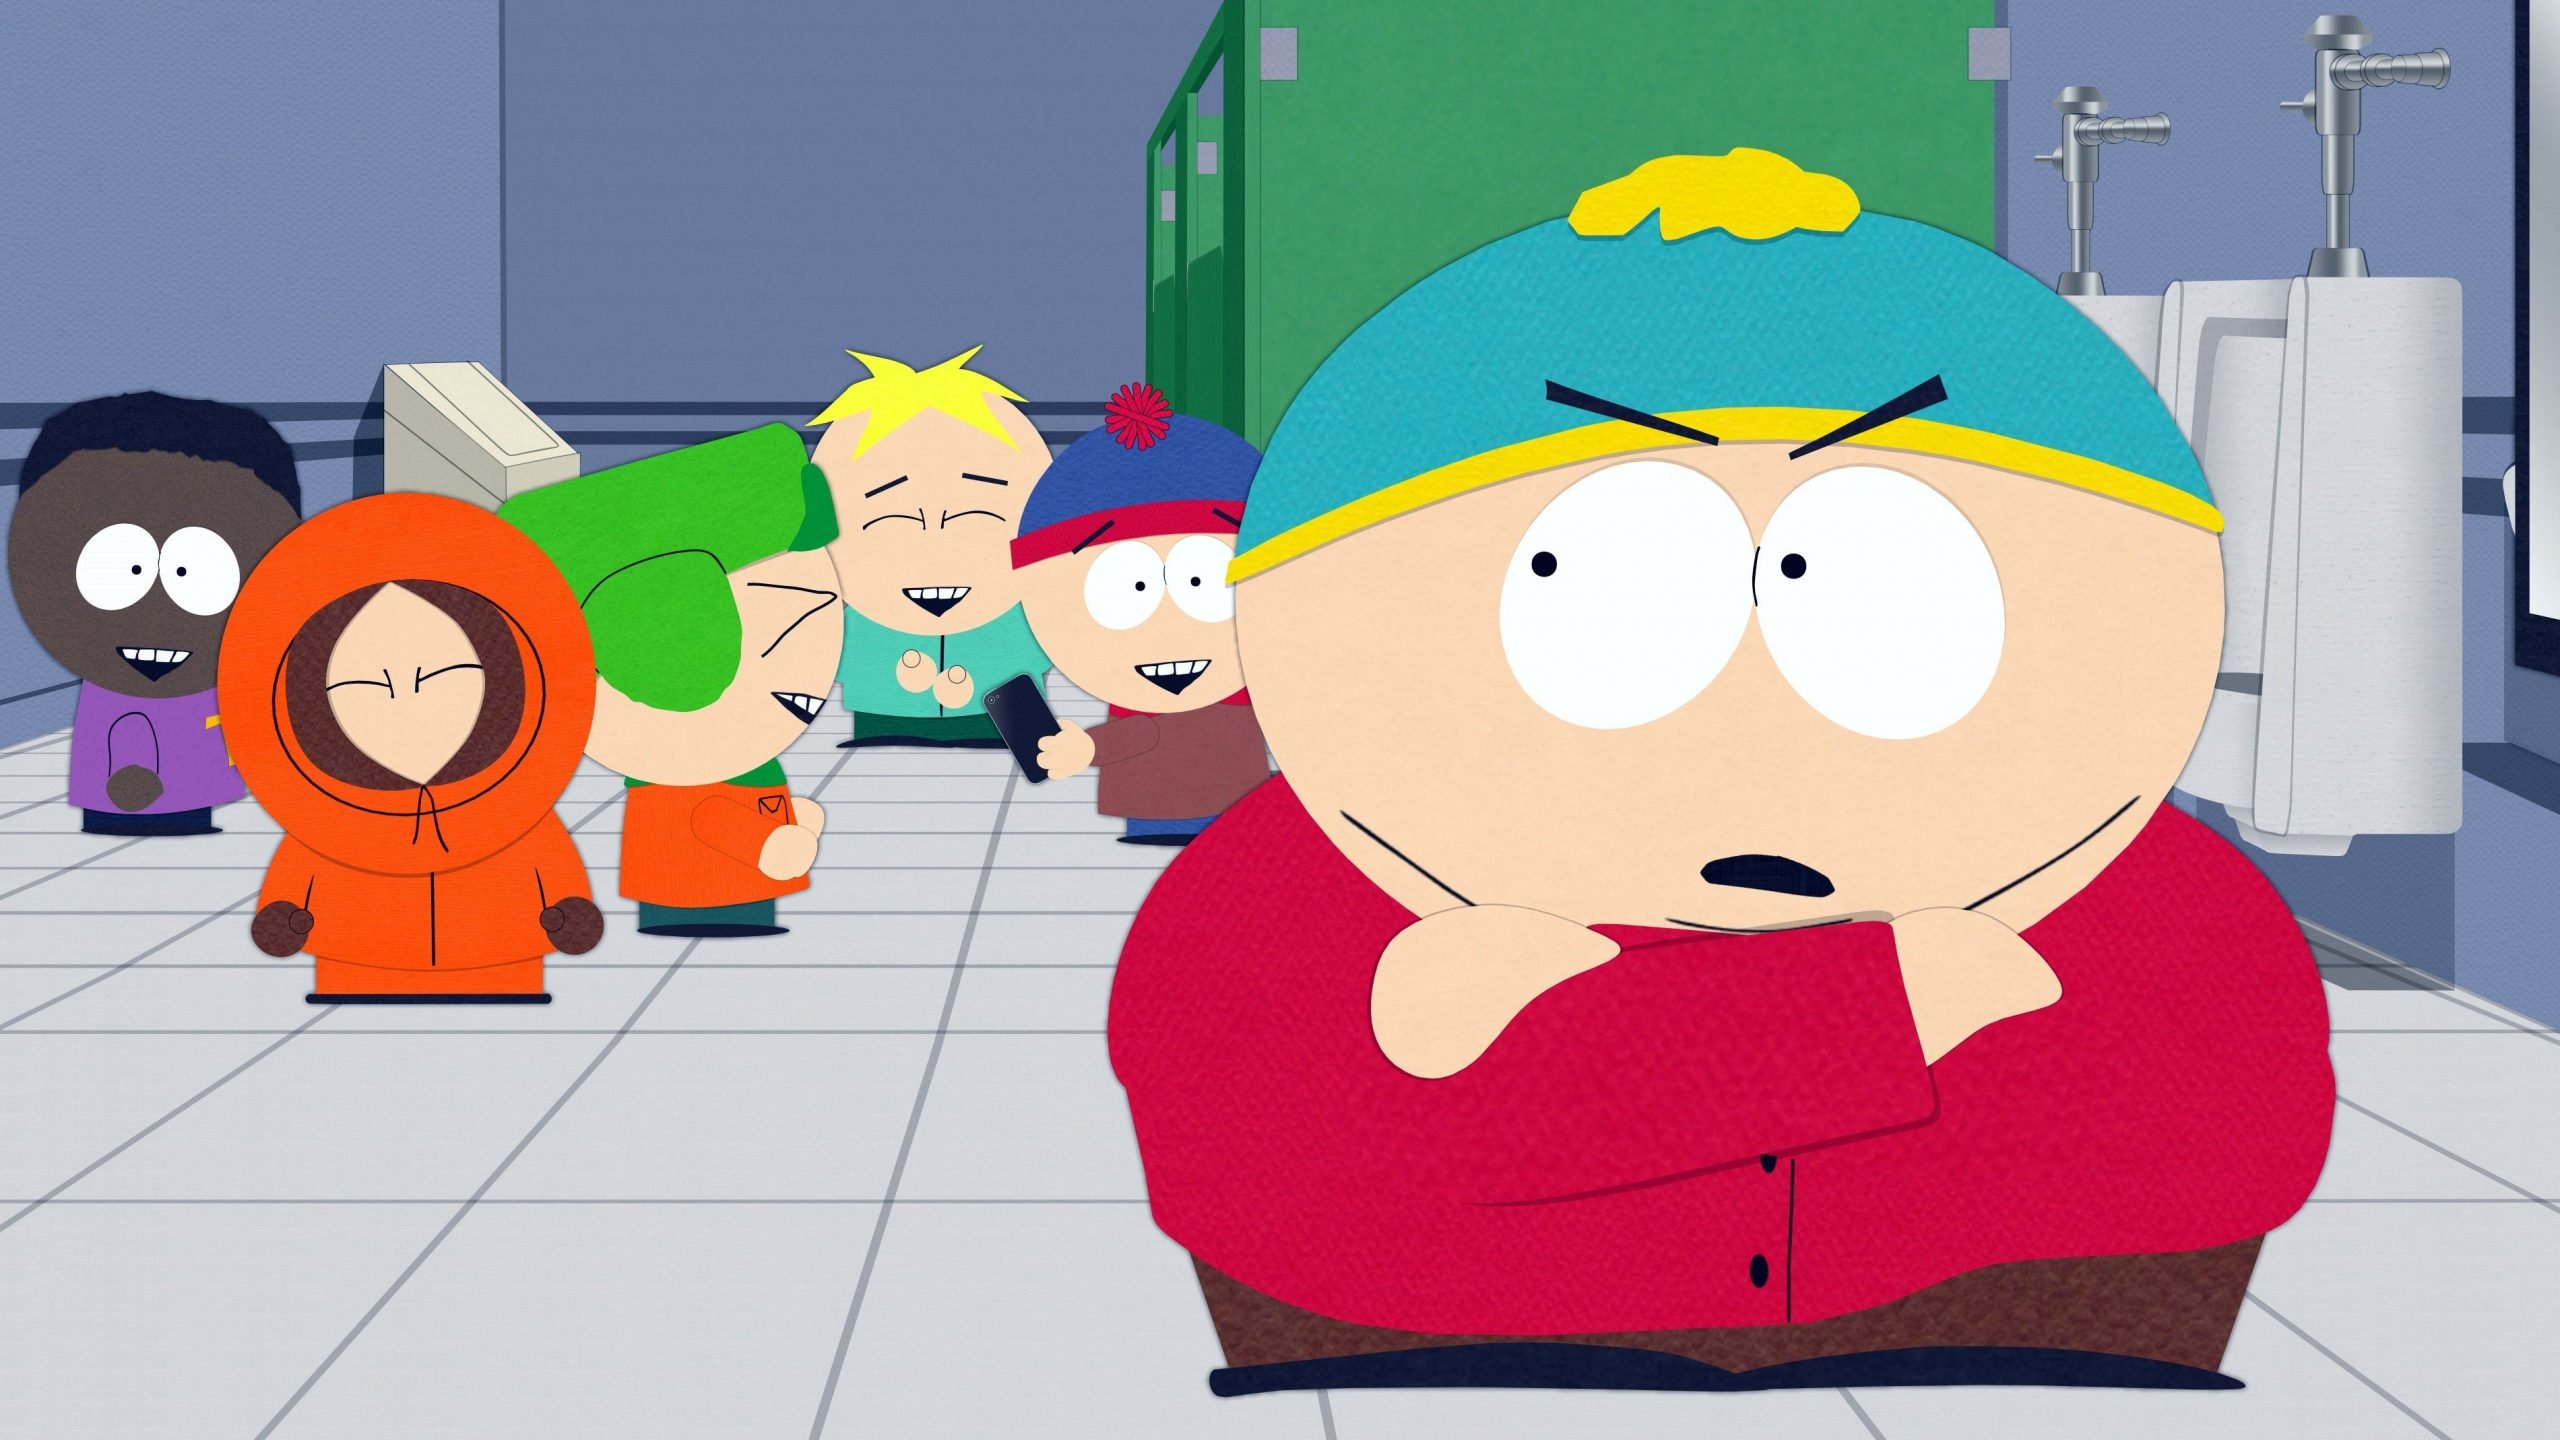 Watch the all-new SOUTH PARK THE STREAMING WARS, now on Paramount+